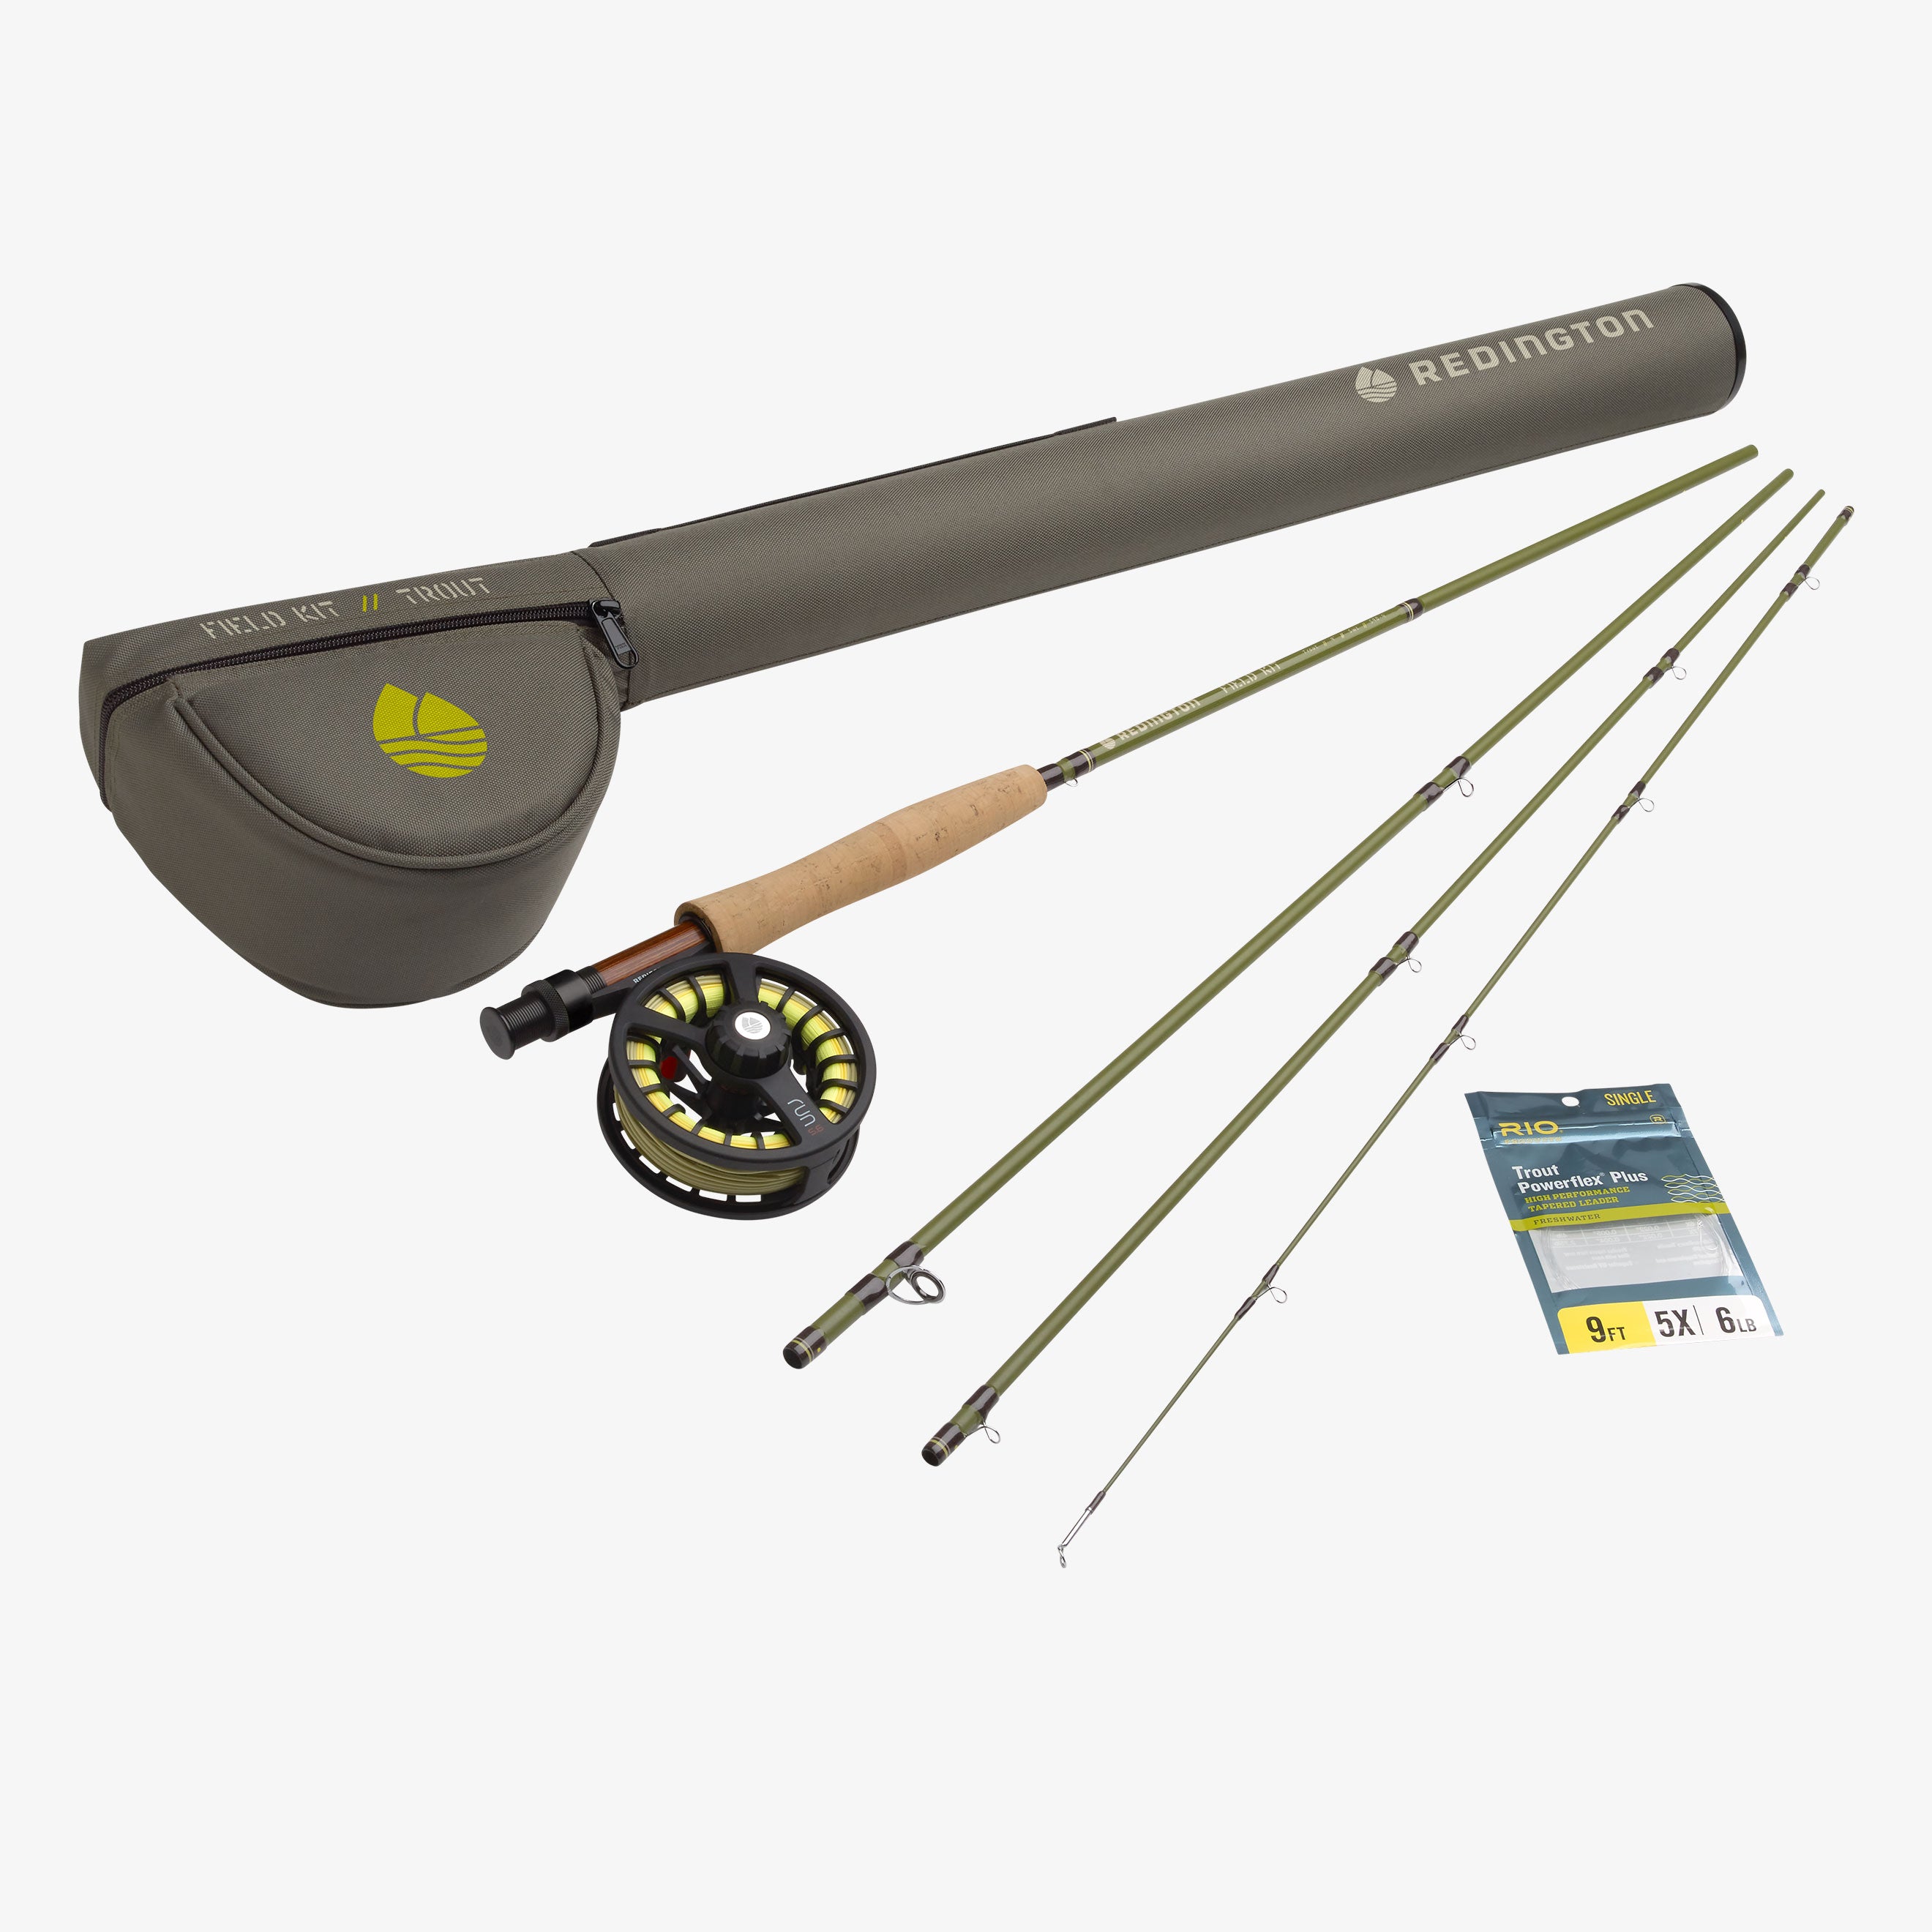 Starter Rod kits For Beginners  The North American Fly Fishing Forum -  sponsored by Thomas Turner